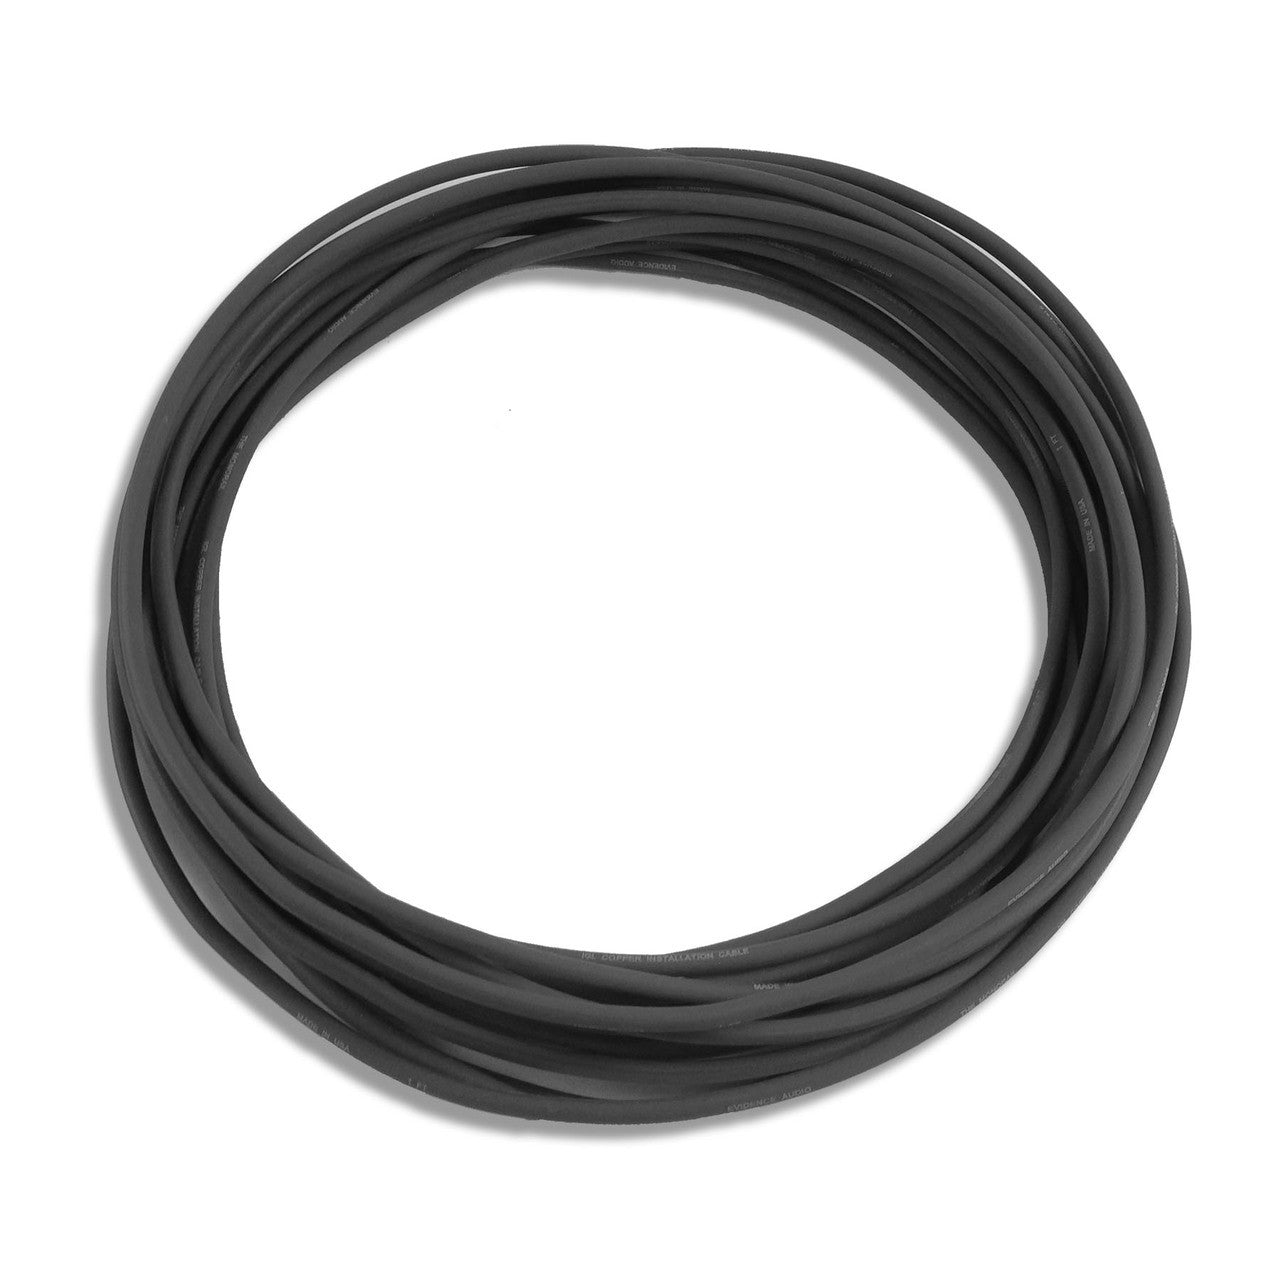 Evidence Audio Black Monorail Cable